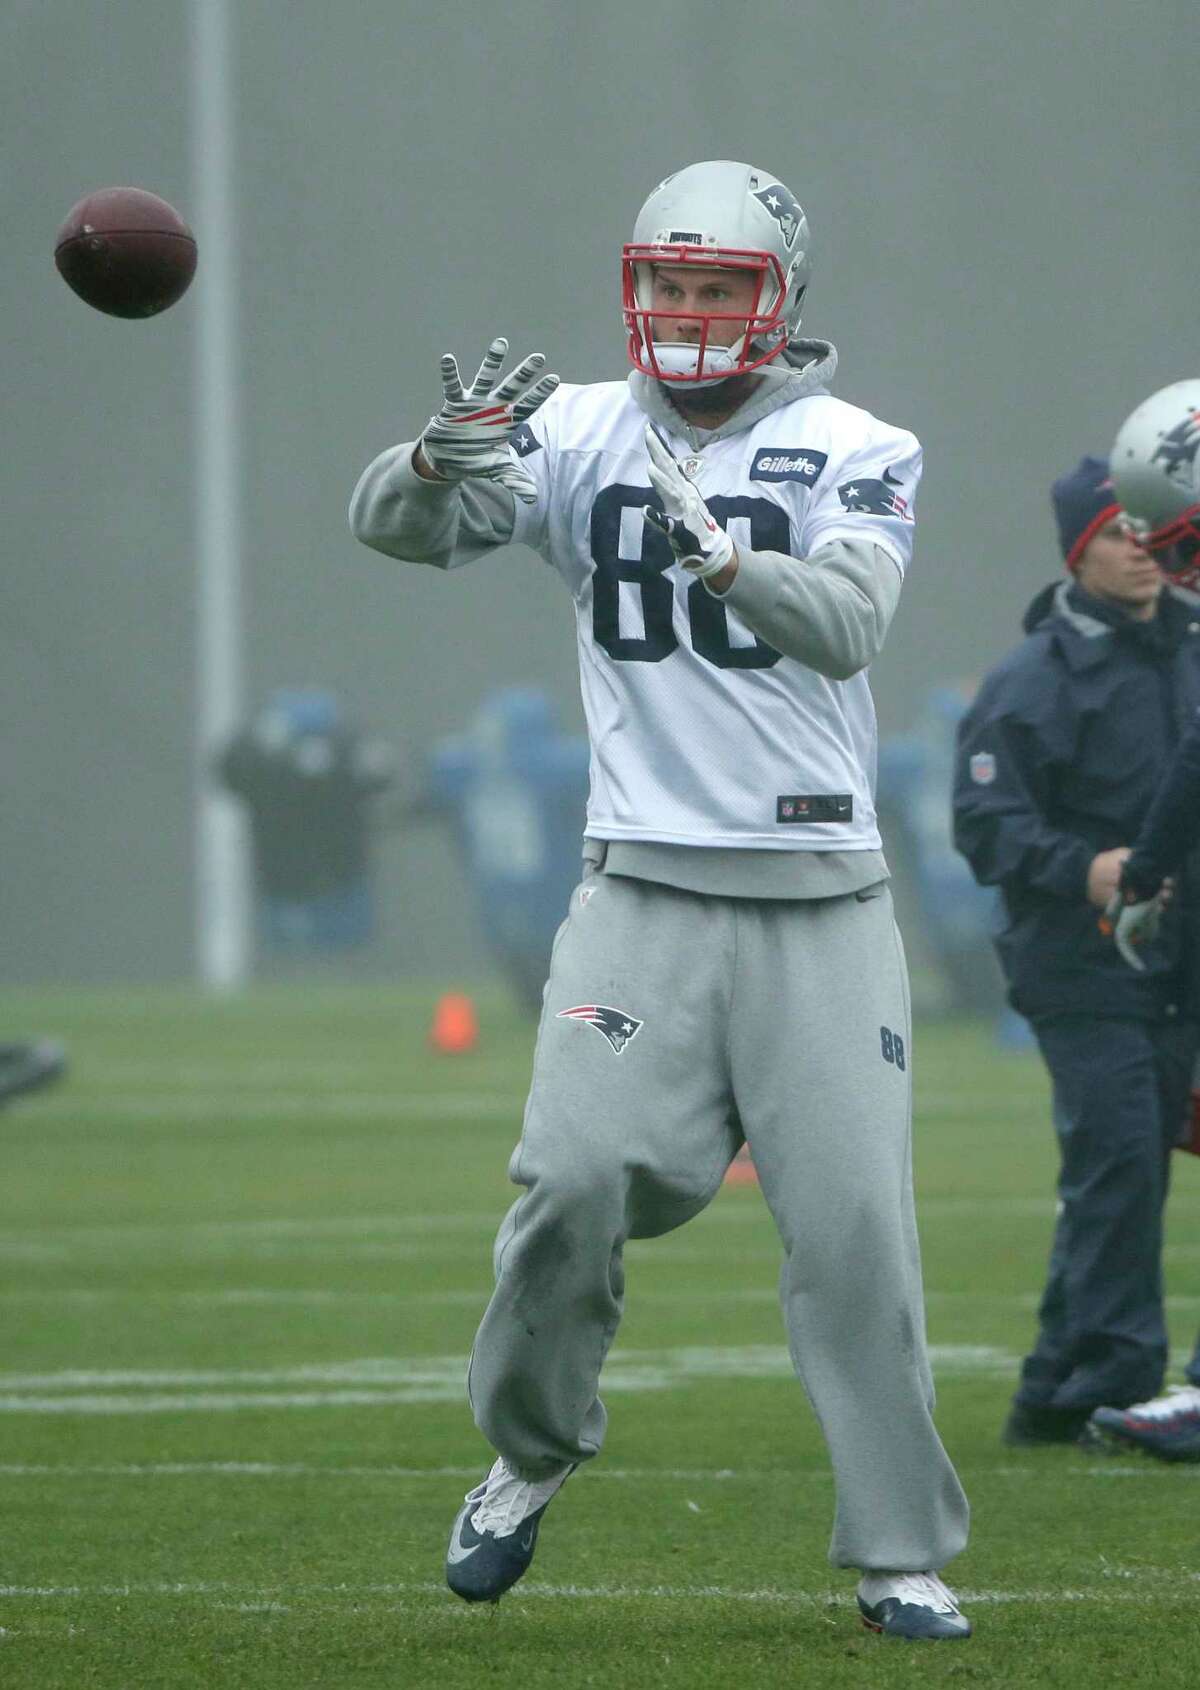 New England Patriots tight end Scott Chandler catches the ball during practice Wednesday in Foxborough, Mass.